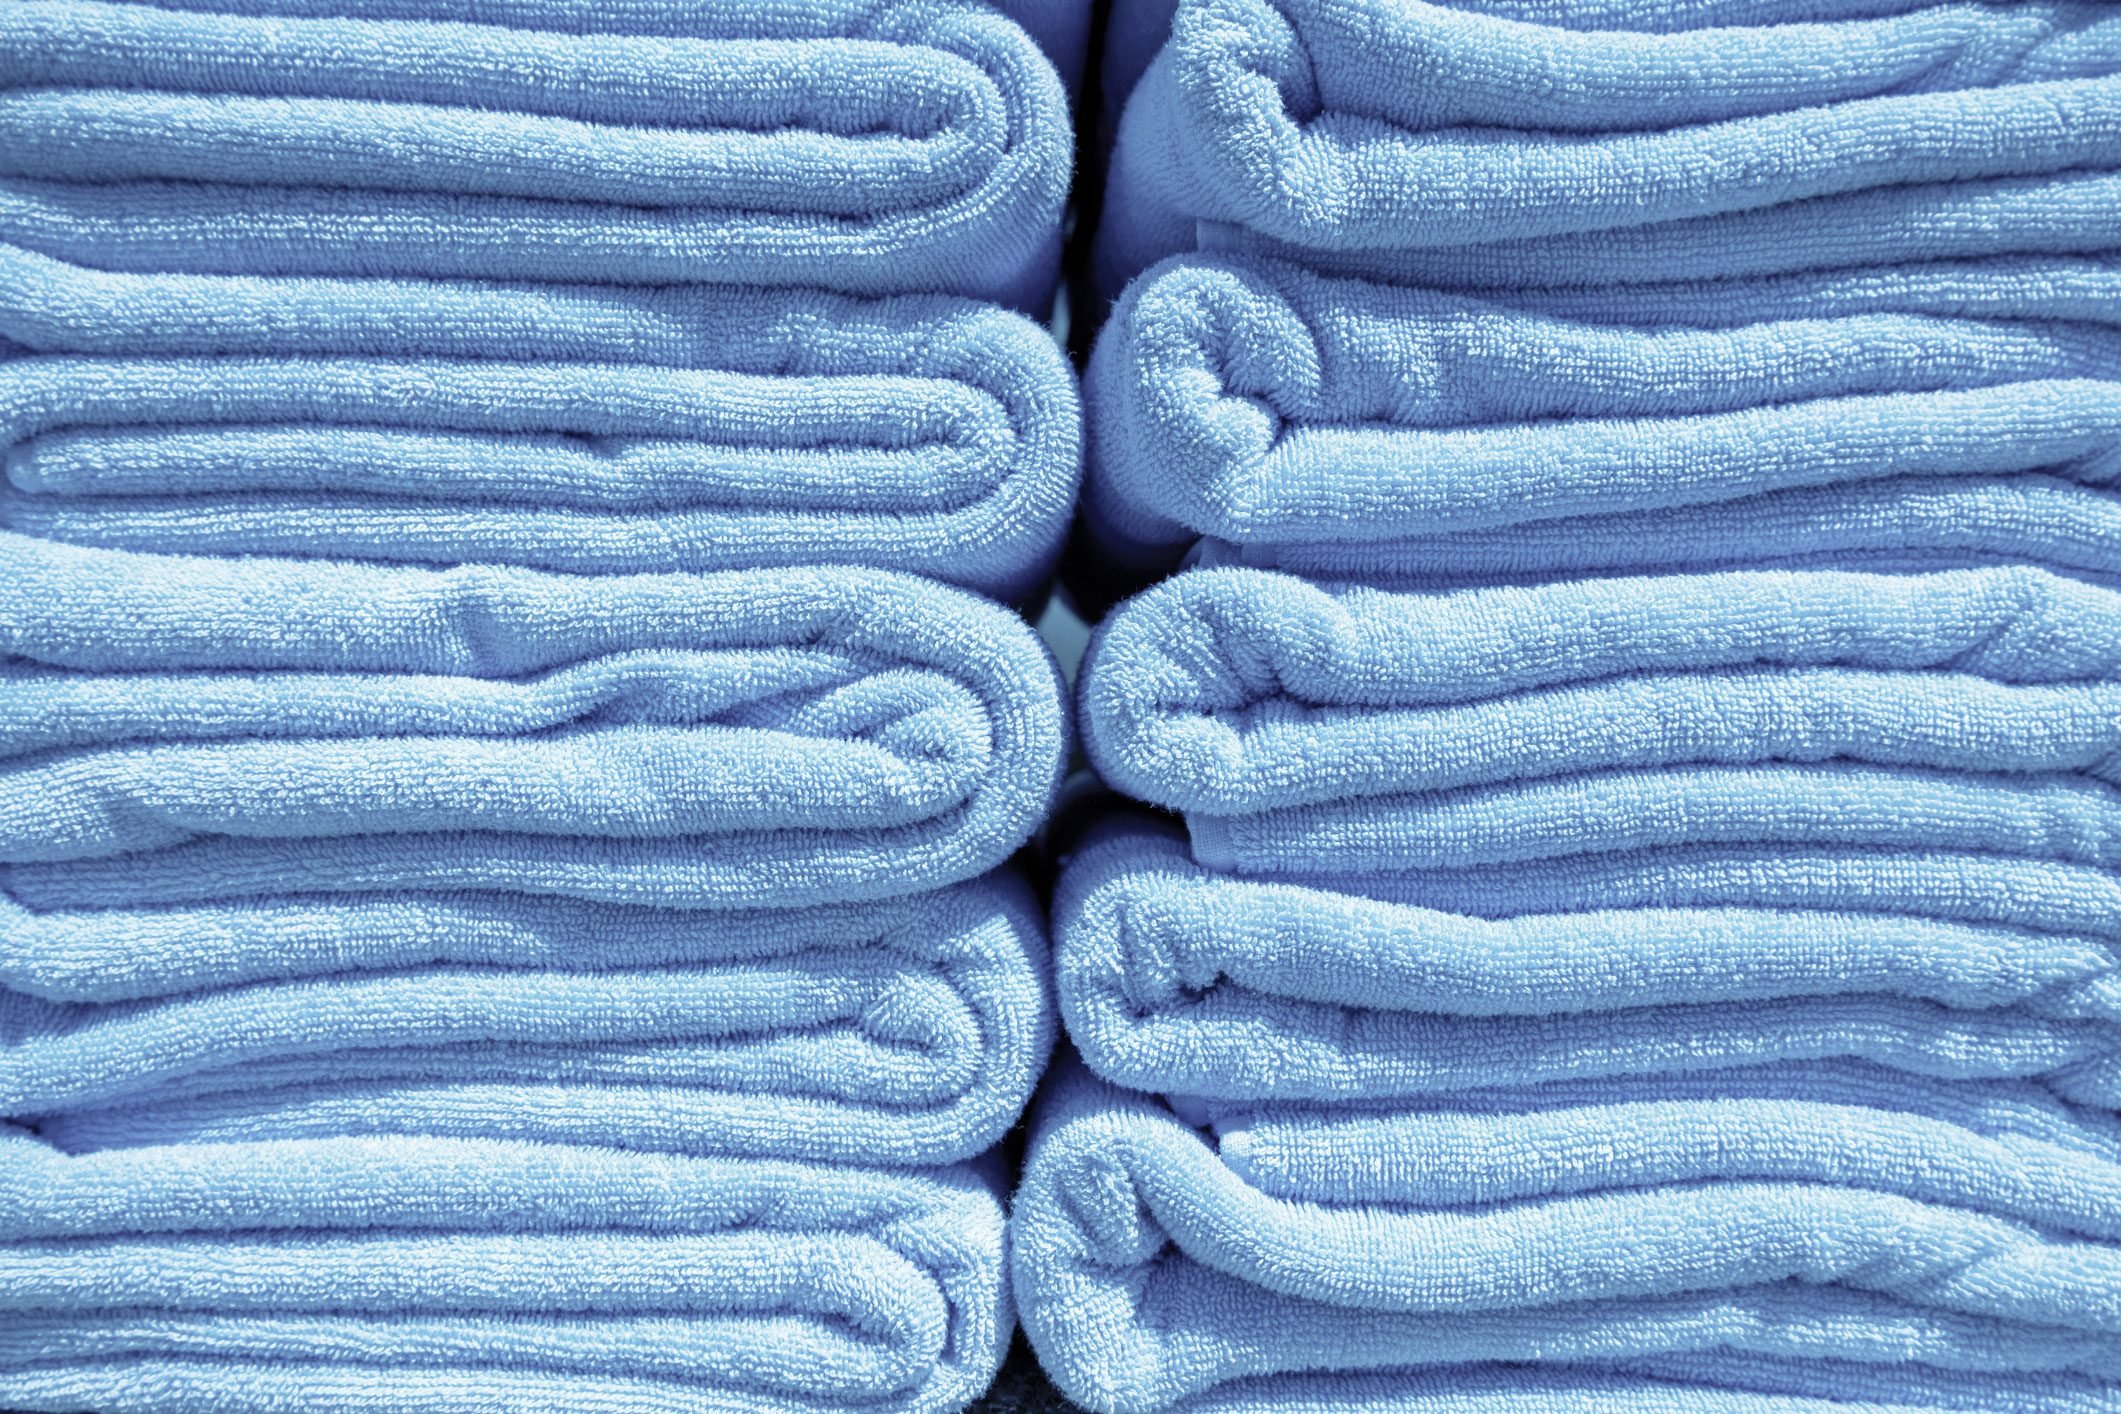 How to Wash Towels — Easy Tips to Keep Towels Clean and Fluffy